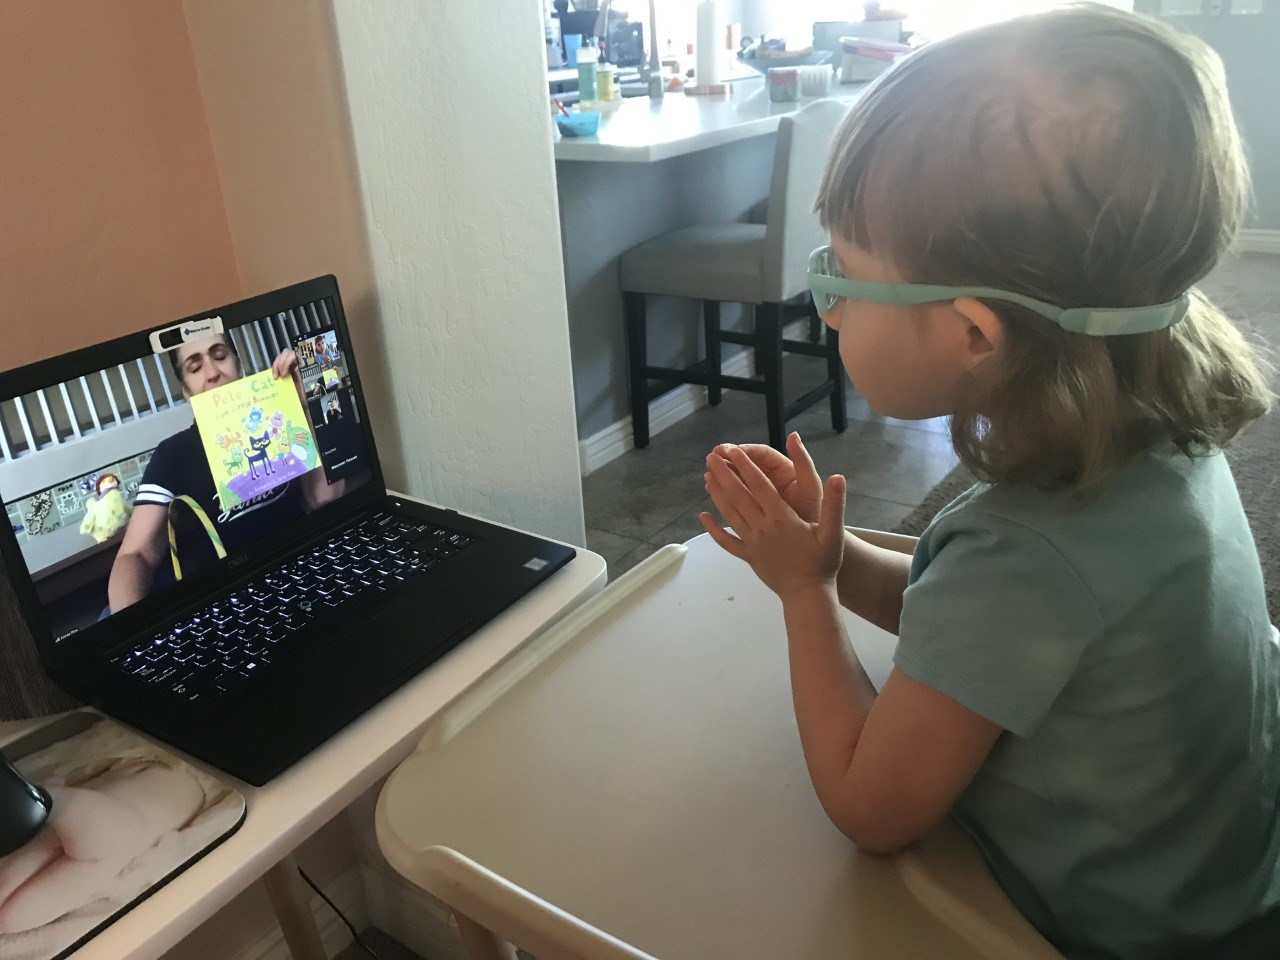 A kid with elastic-band glasses sits and watches a video on a laptop.